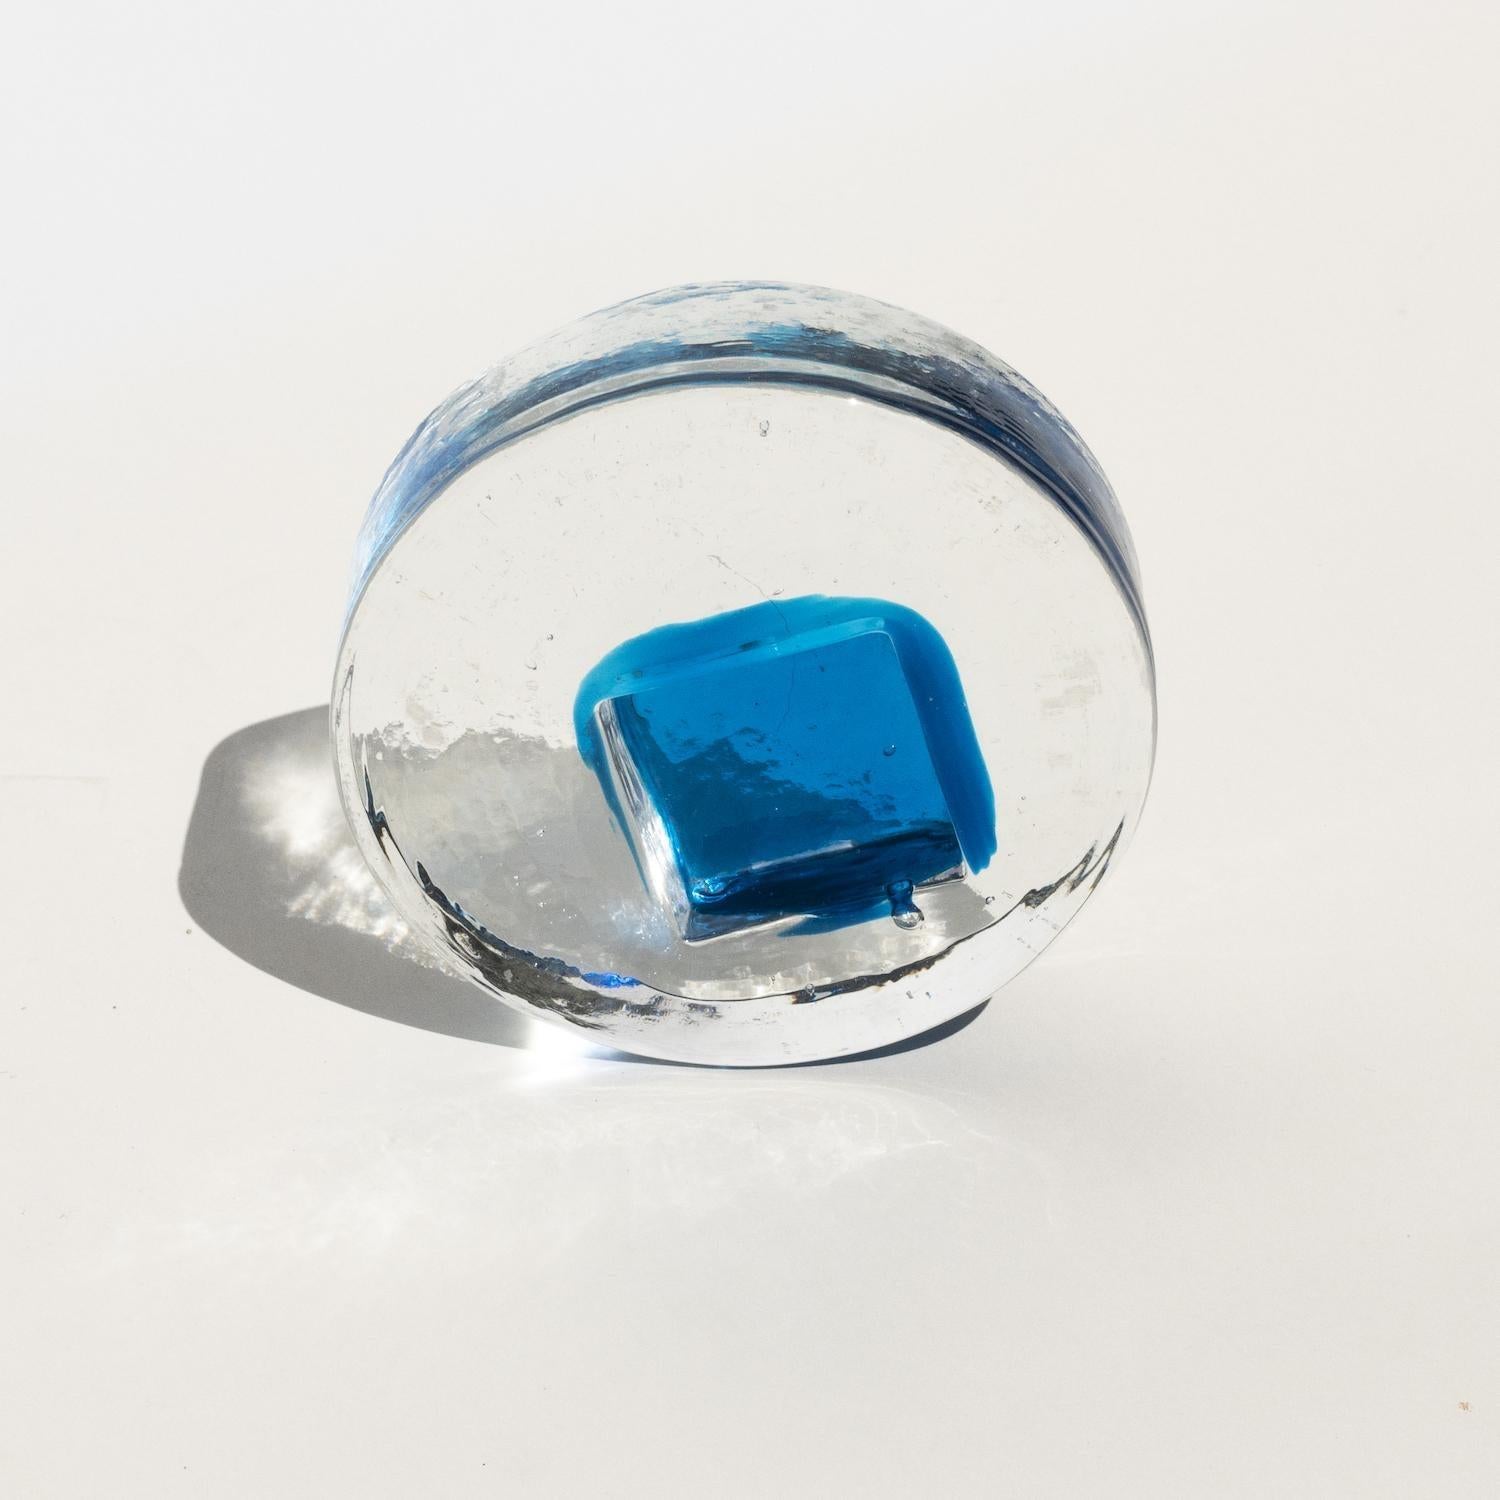 Mid-Century Modern Vintage Mid-Century Murano Glass Ashtray in Frosted Glass with Blue Accents For Sale